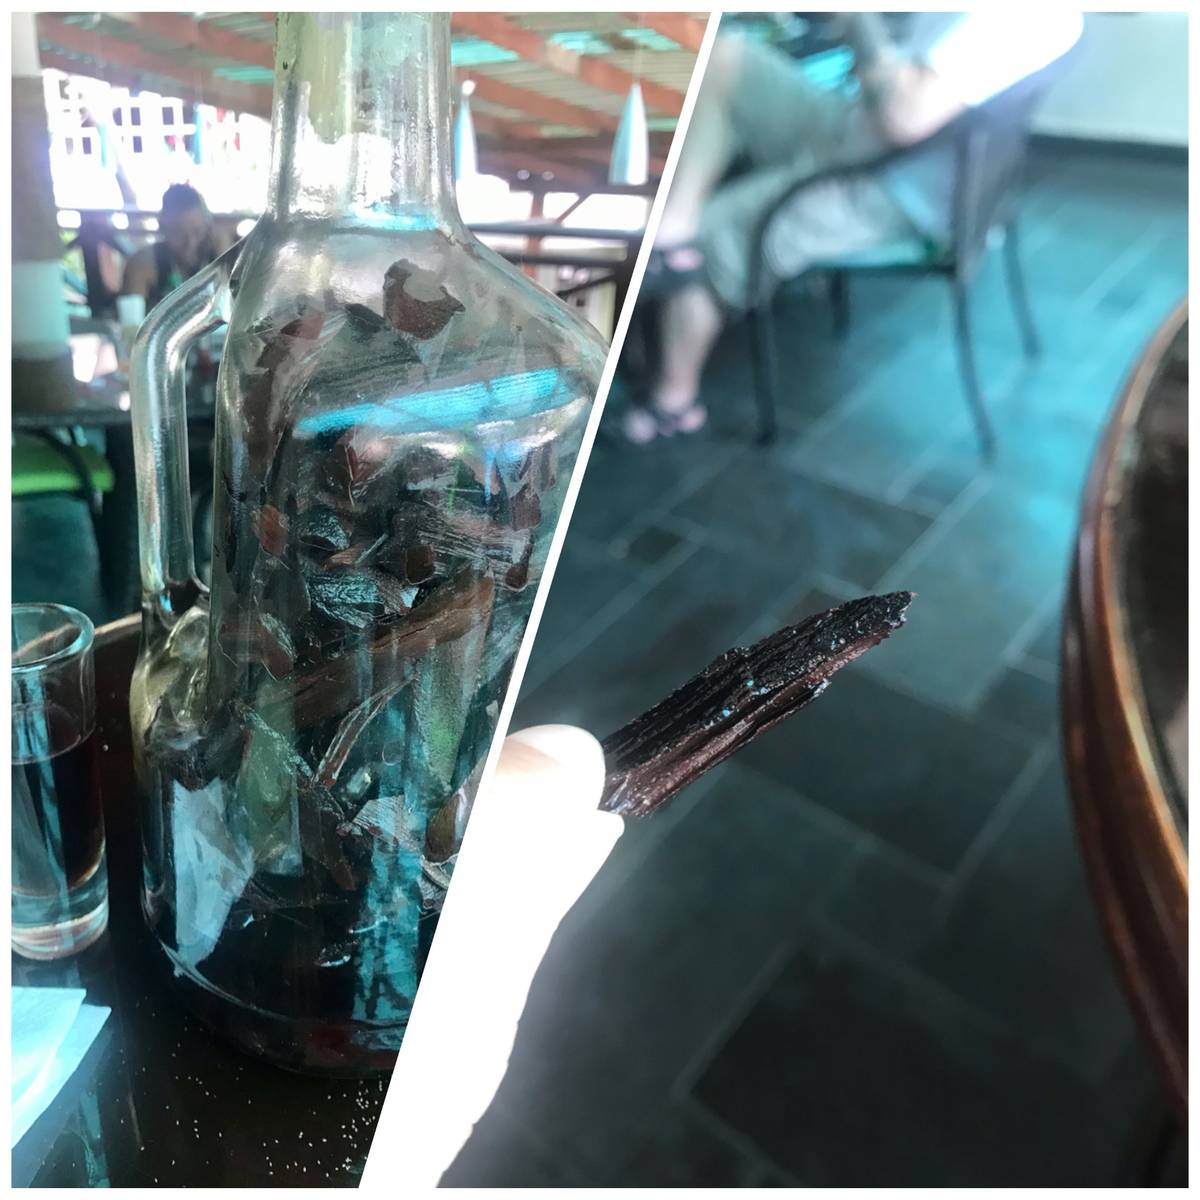 ”Mamjuana” mixed in a bottle and the tree bark inside